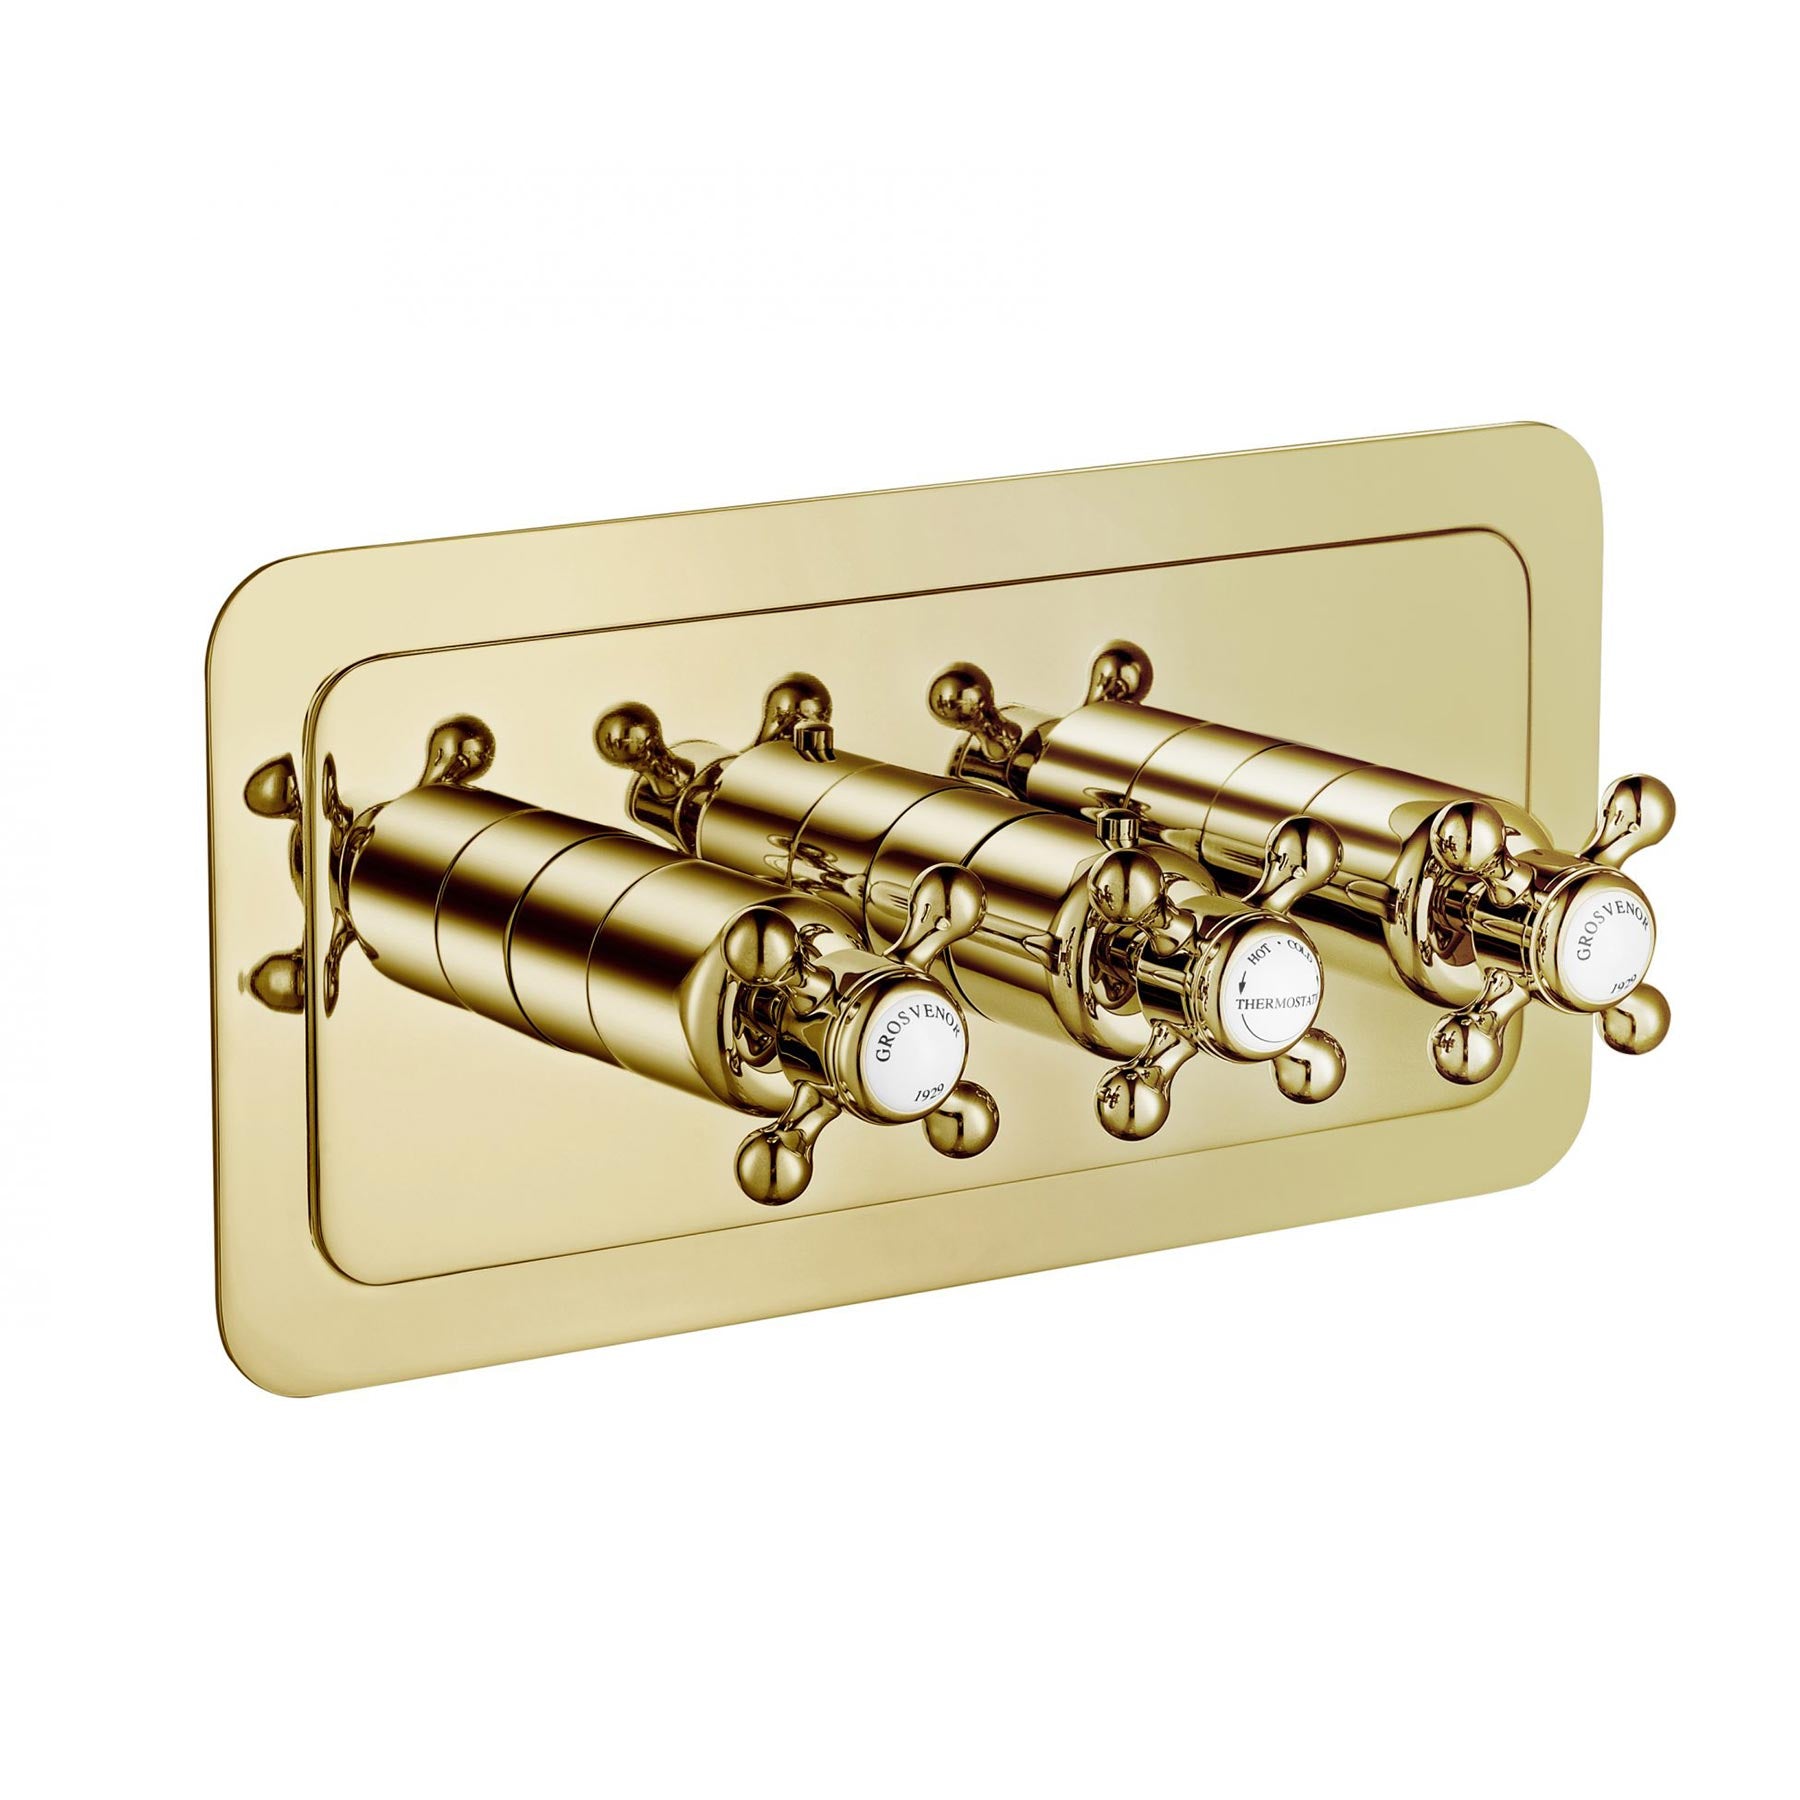 Chester Gold Cross thermostatic concealed 2 outlet shower valve, horizontal MP0.5. With one lever for temperature and one to divert water to the desired outlet, these two outlet valve can be paired with 2 water outlet accessories